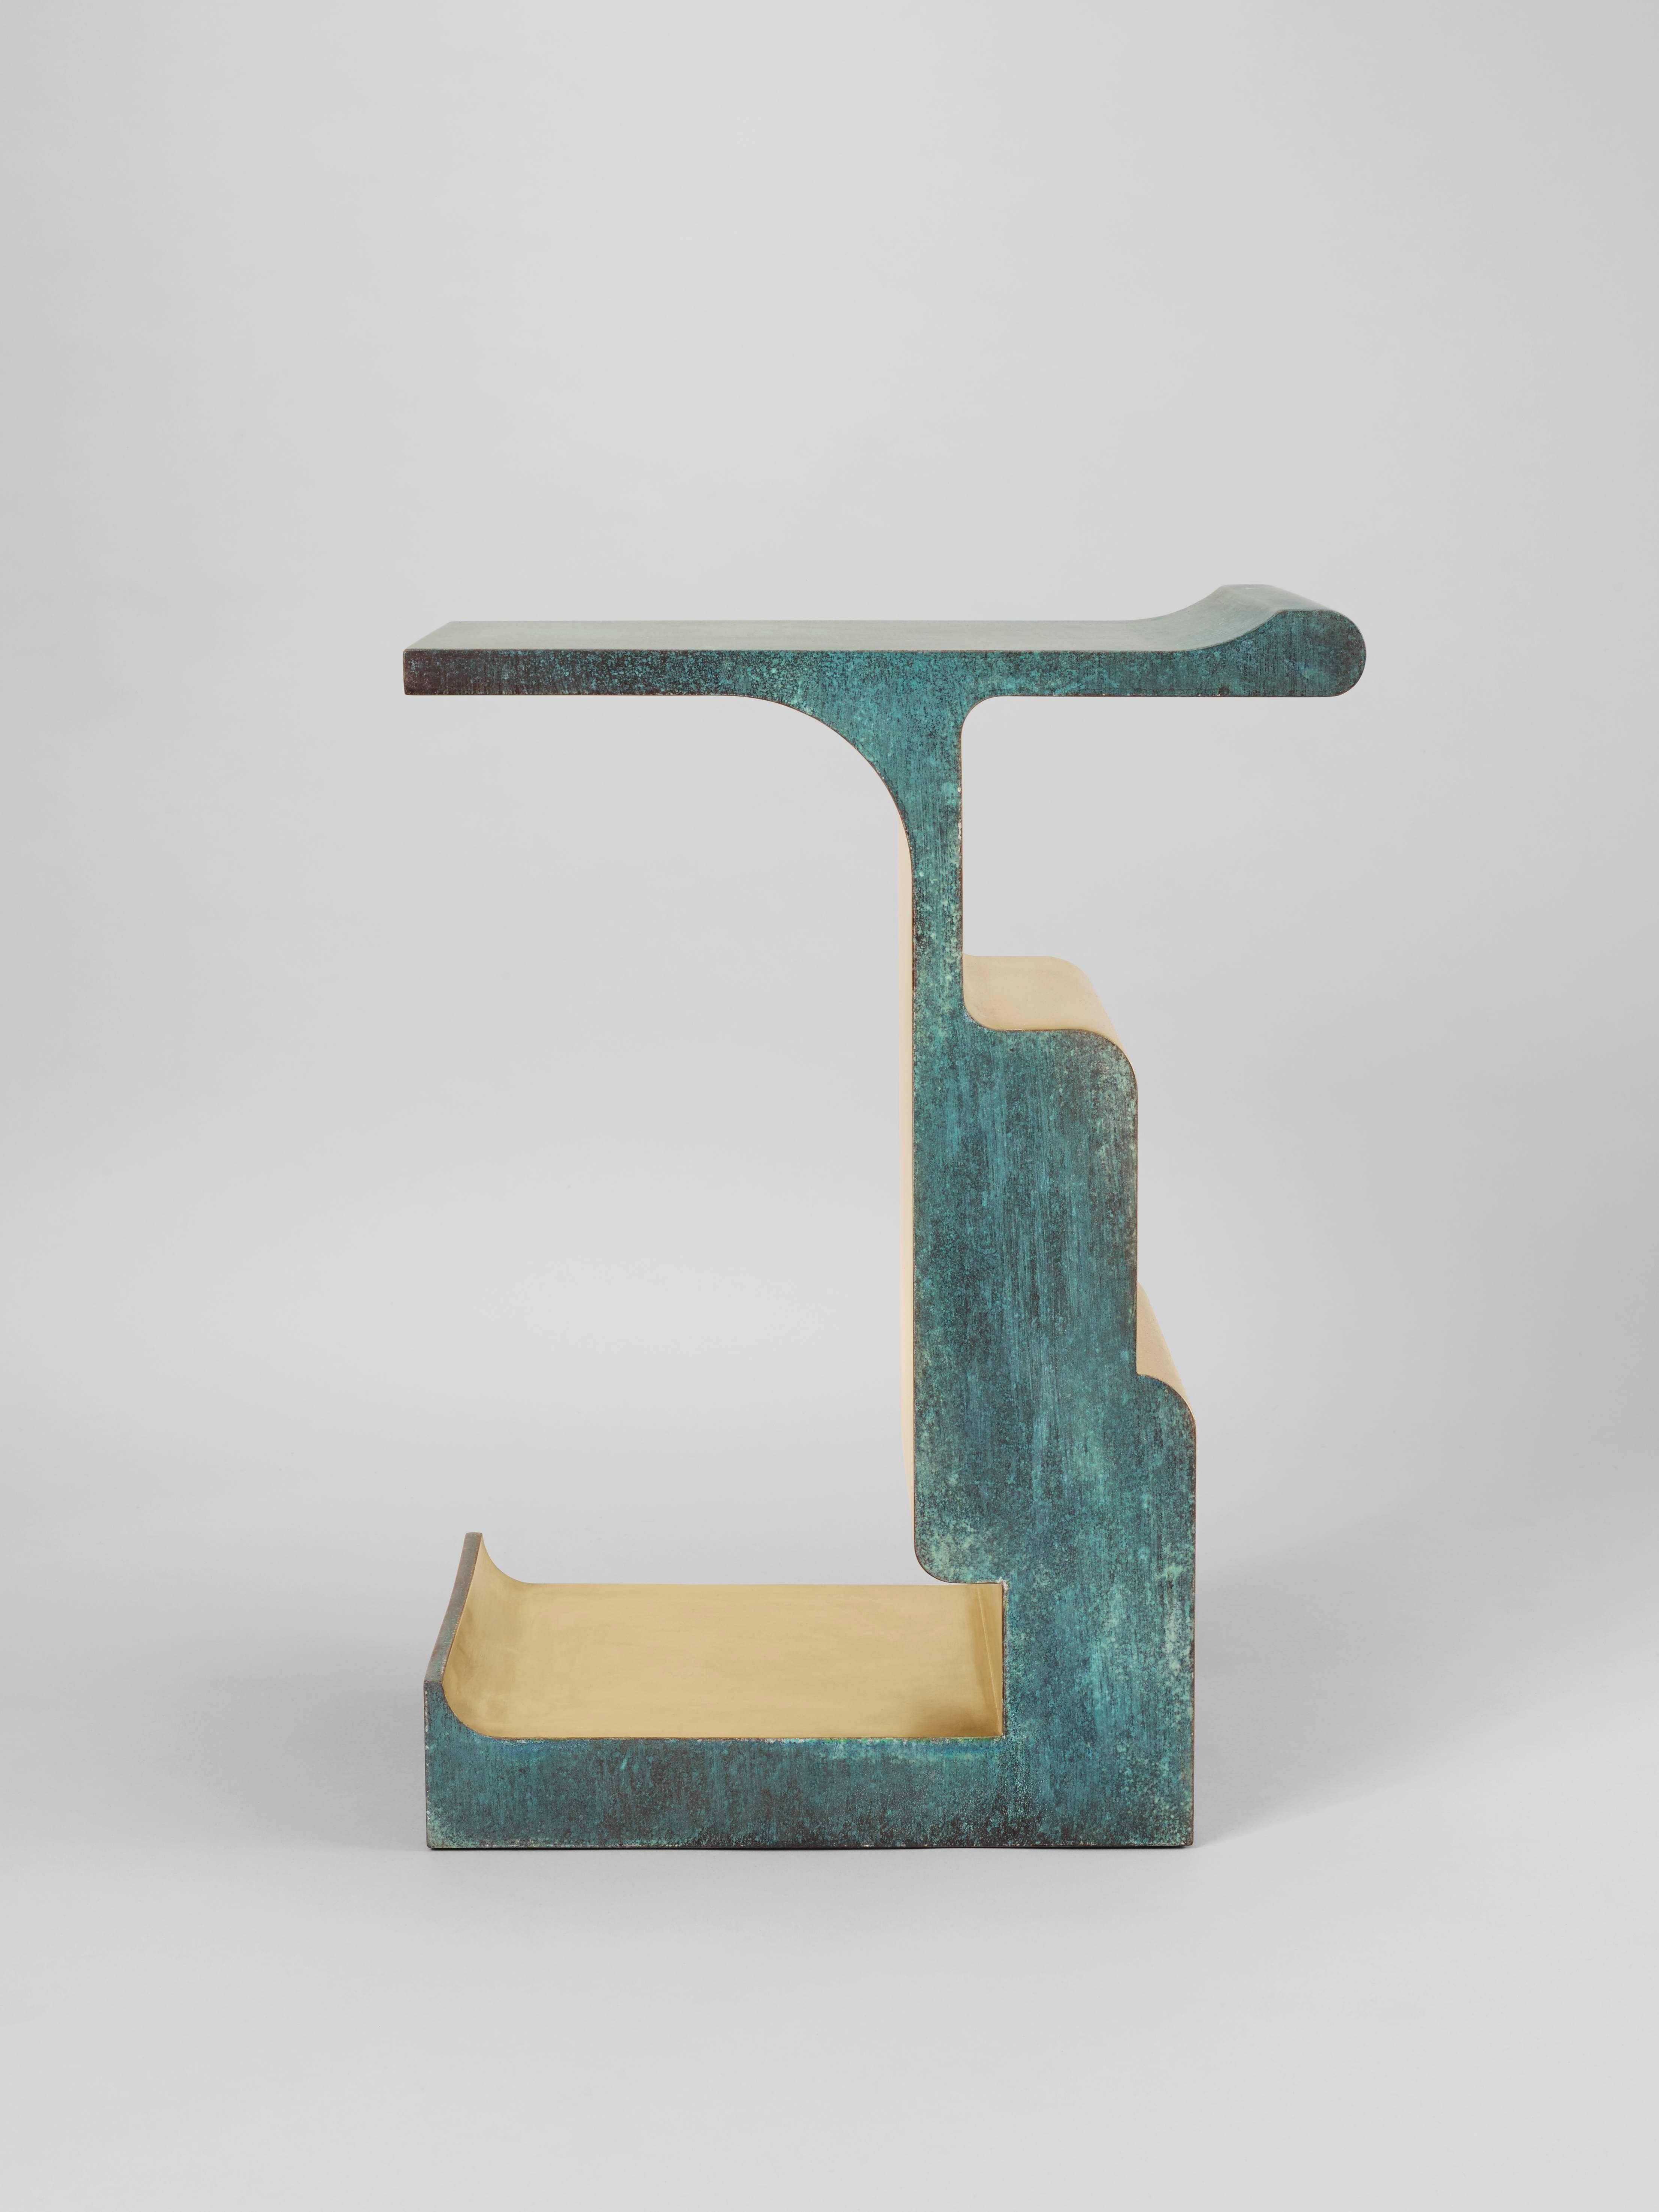 Chinese ‘Xiangsheng Side Table #2', an Oxidized and Brushed Bronze Table by Design MVW